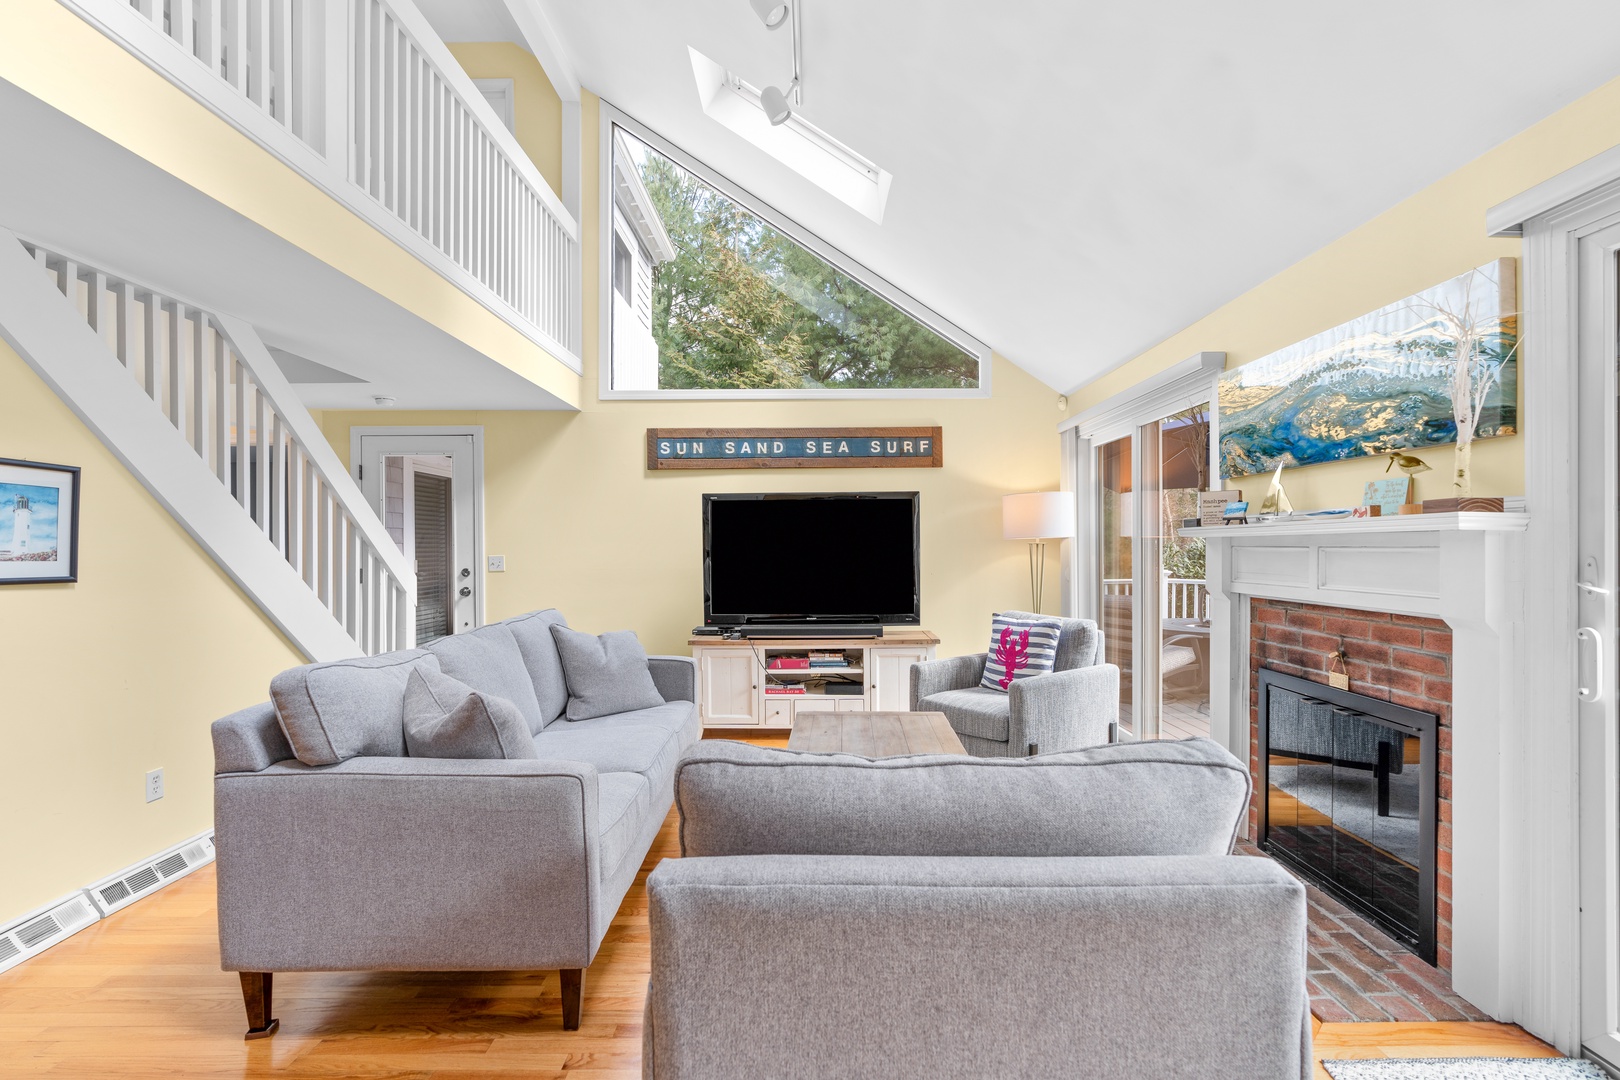 Bright spacious living area with ample seating, and Smart TV